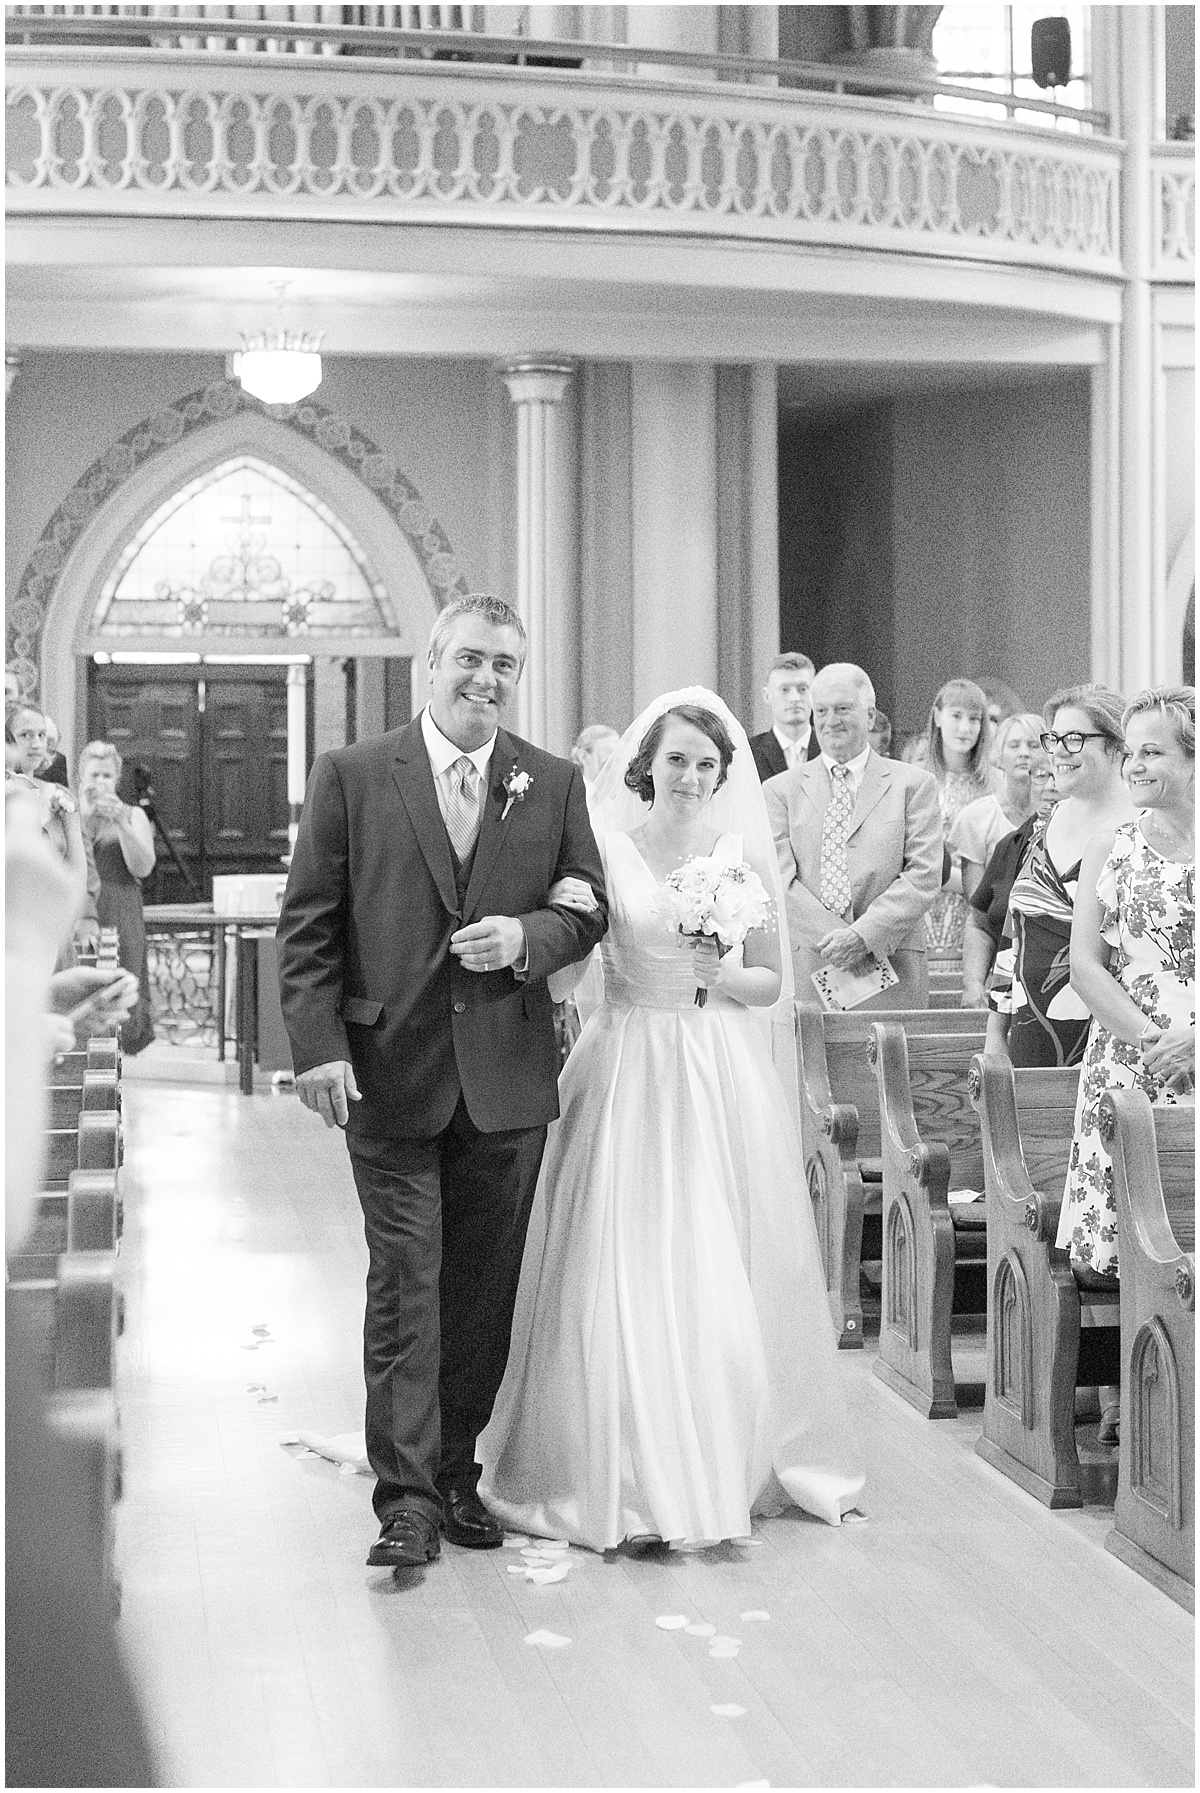 Mr. & Mrs. Randy Fortkamp’s wedding at the Lafayette, Indiana Country Club was photographed by Victoria Rayburn Photography.